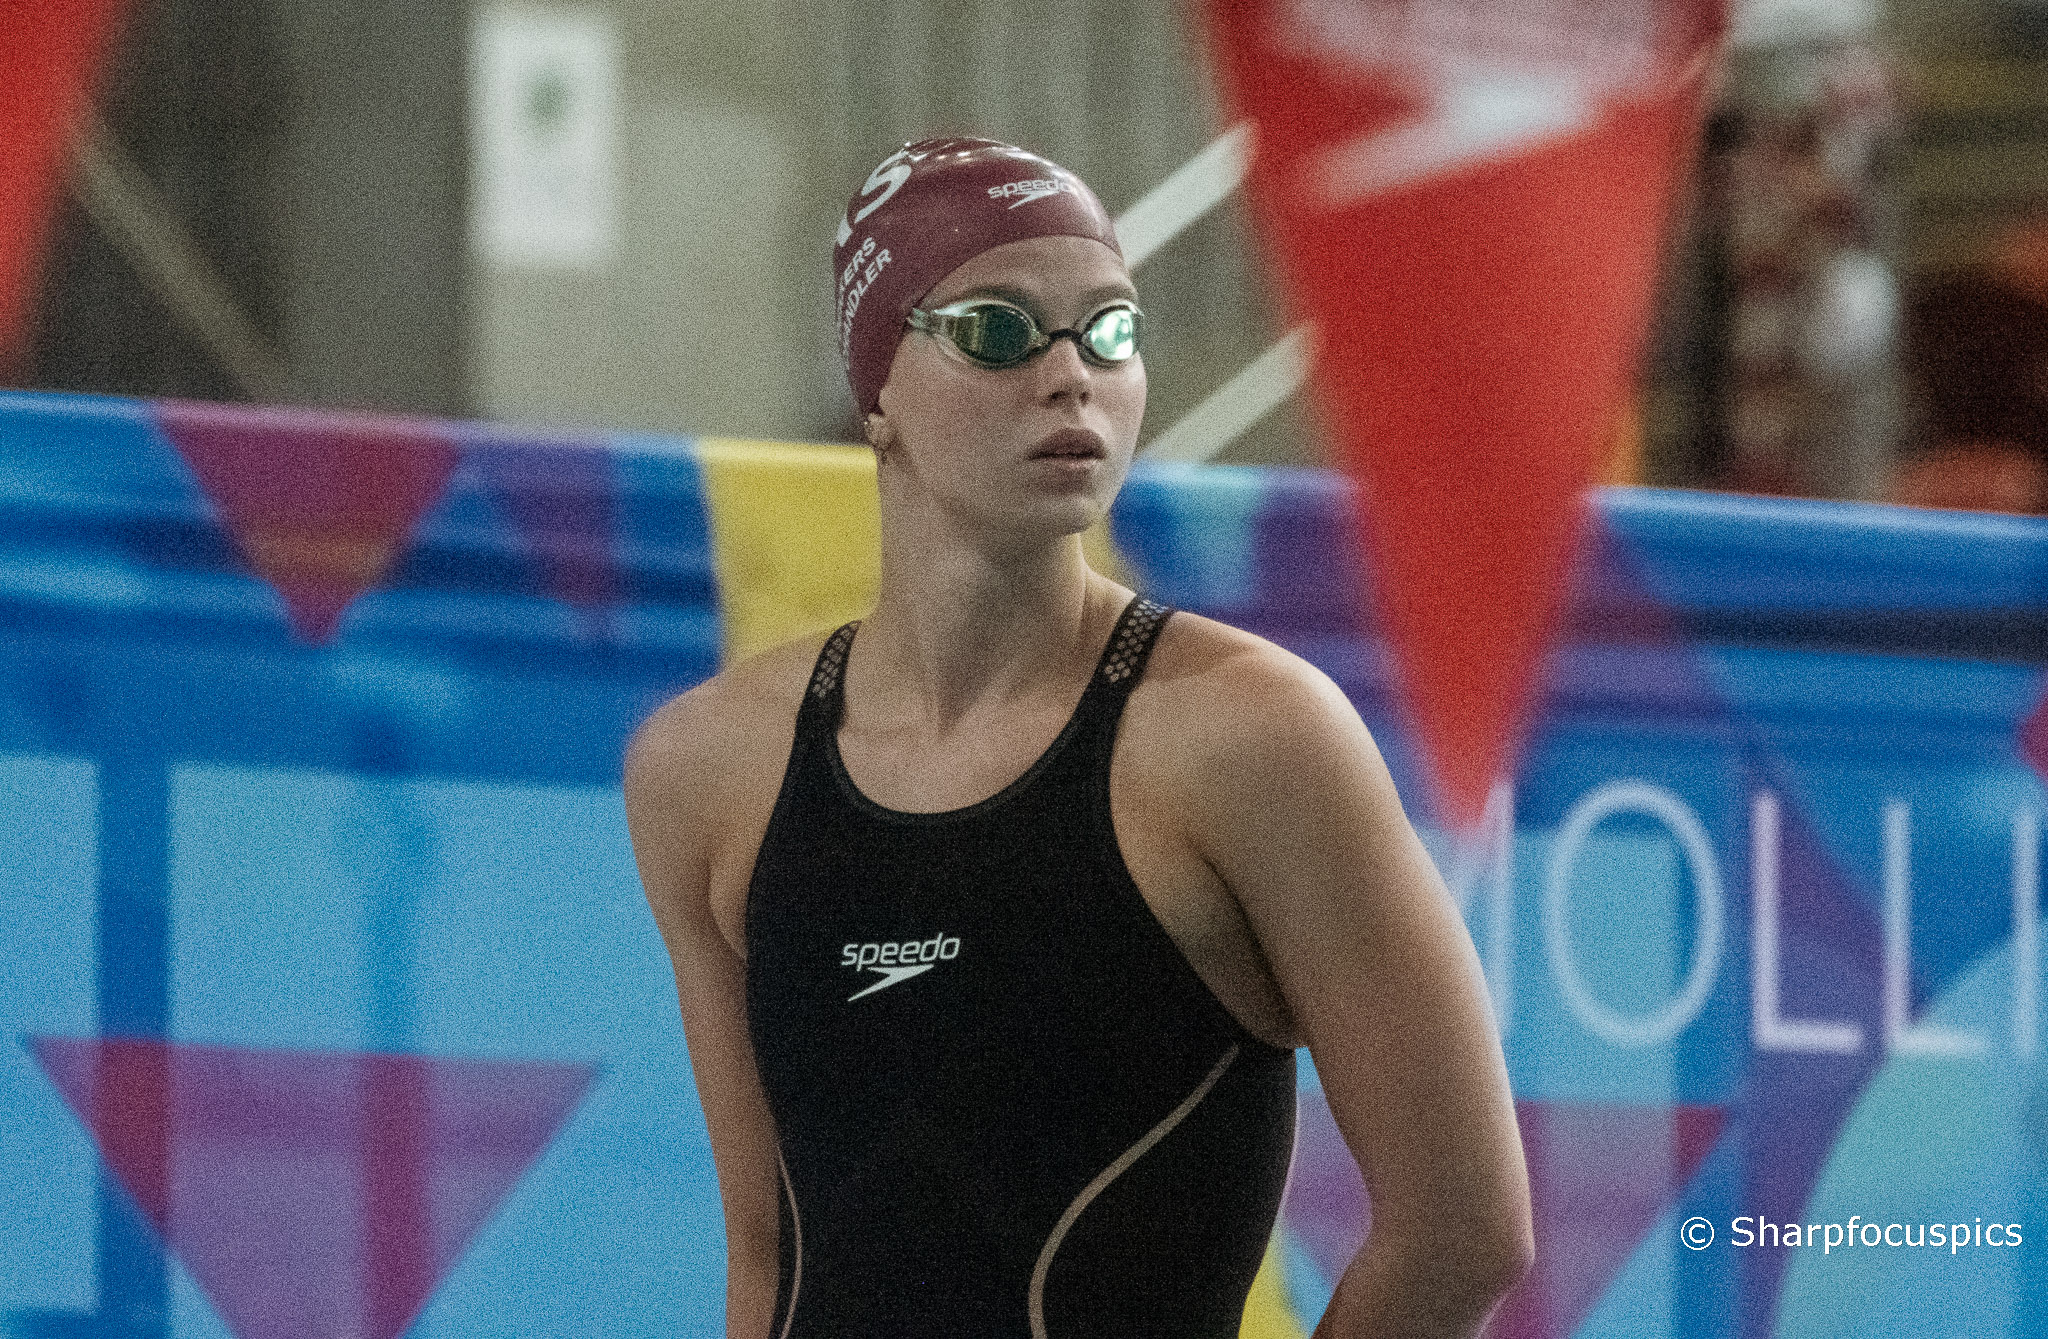 Elizabeth Dekkers Breaks 200 Fly All Comers Record with a Time of 2:05.20